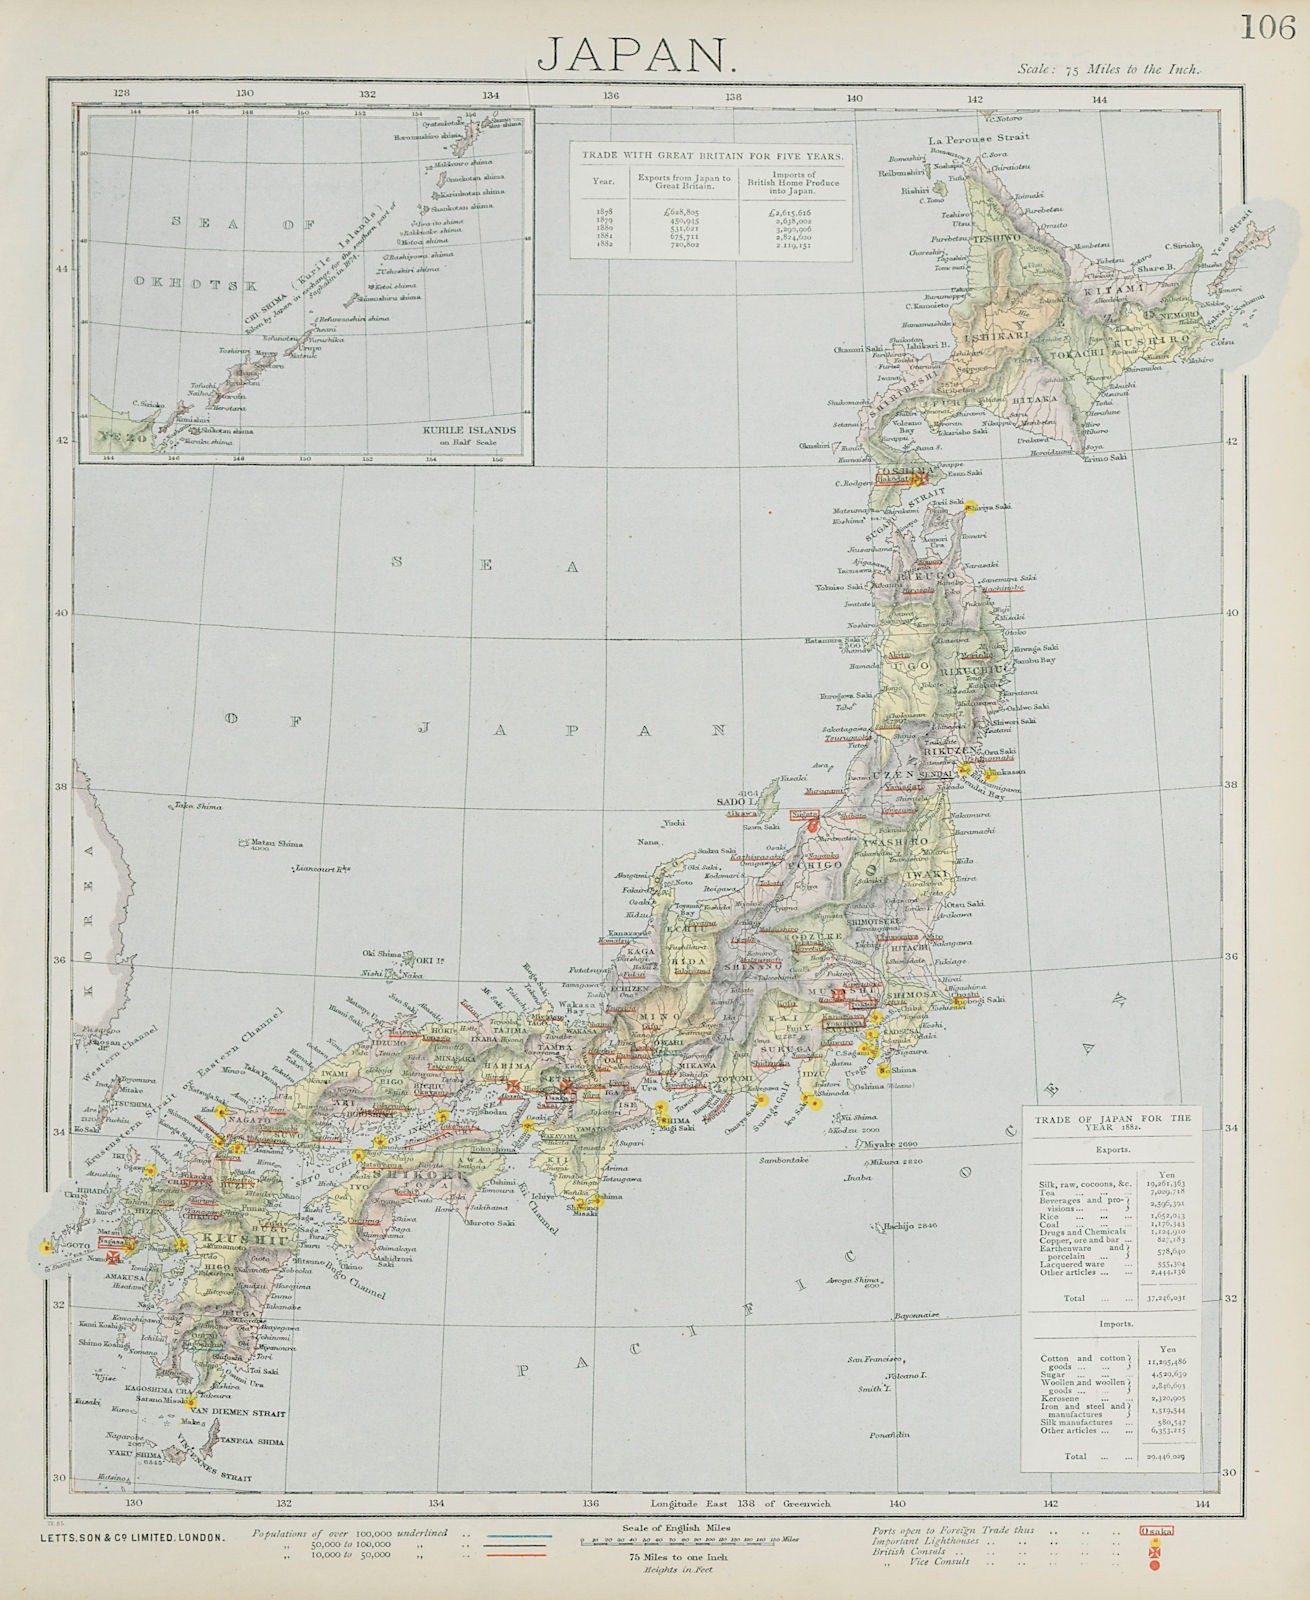 Associate Product JAPAN. Lighthouses & British Consuls. Silk & tea exports. LETTS 1884 old map